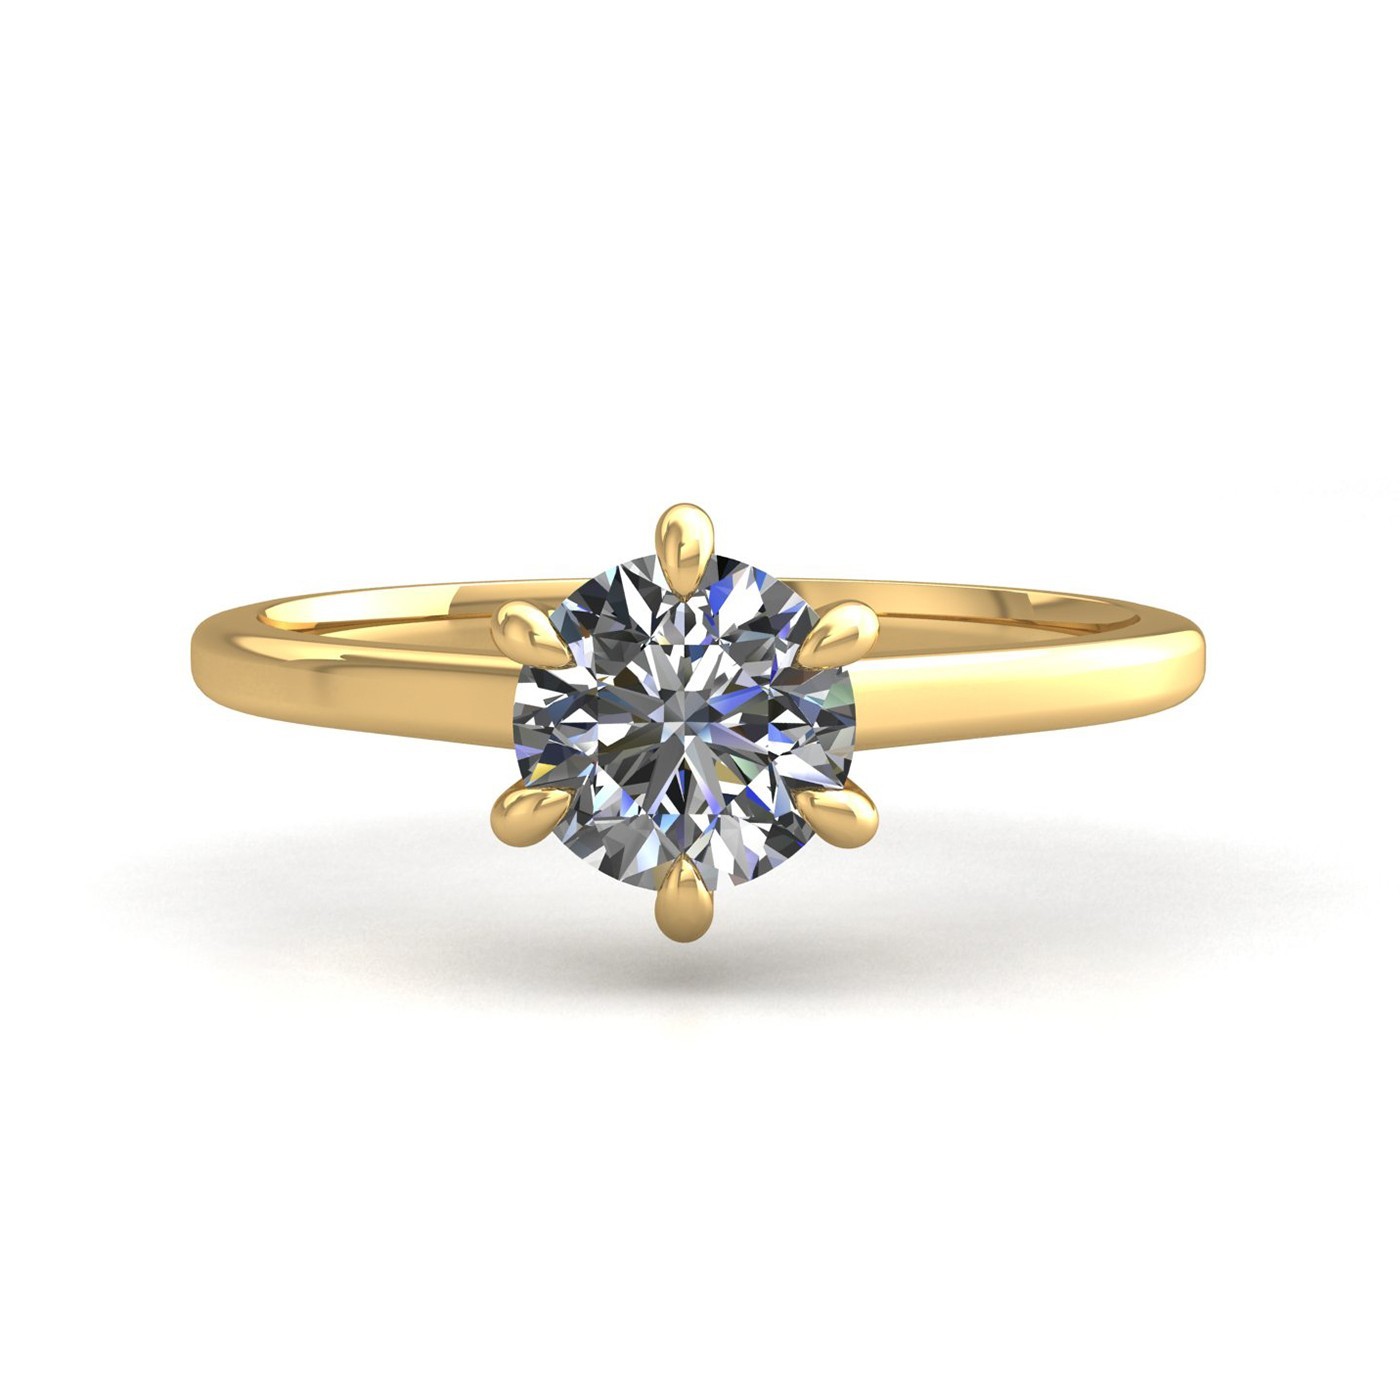 18k yellow gold 2,00 ct 6 prongs solitaire round cut diamond engagement ring with whisper thin band Photos & images